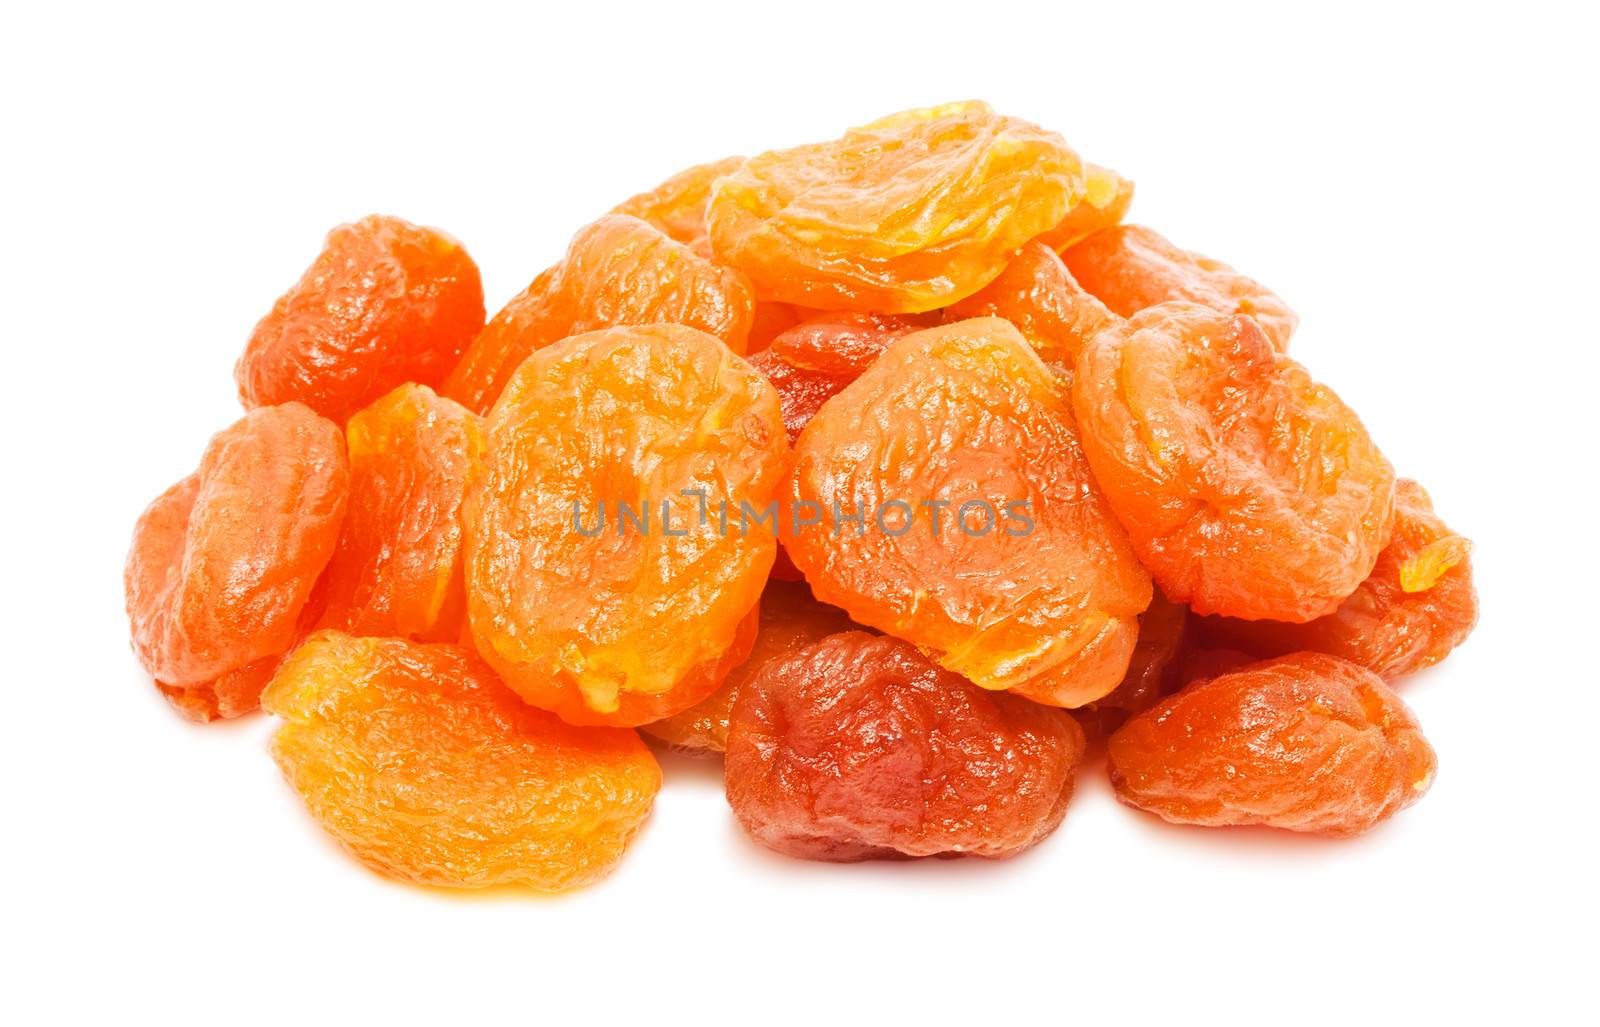 Dried apricots by sailorr